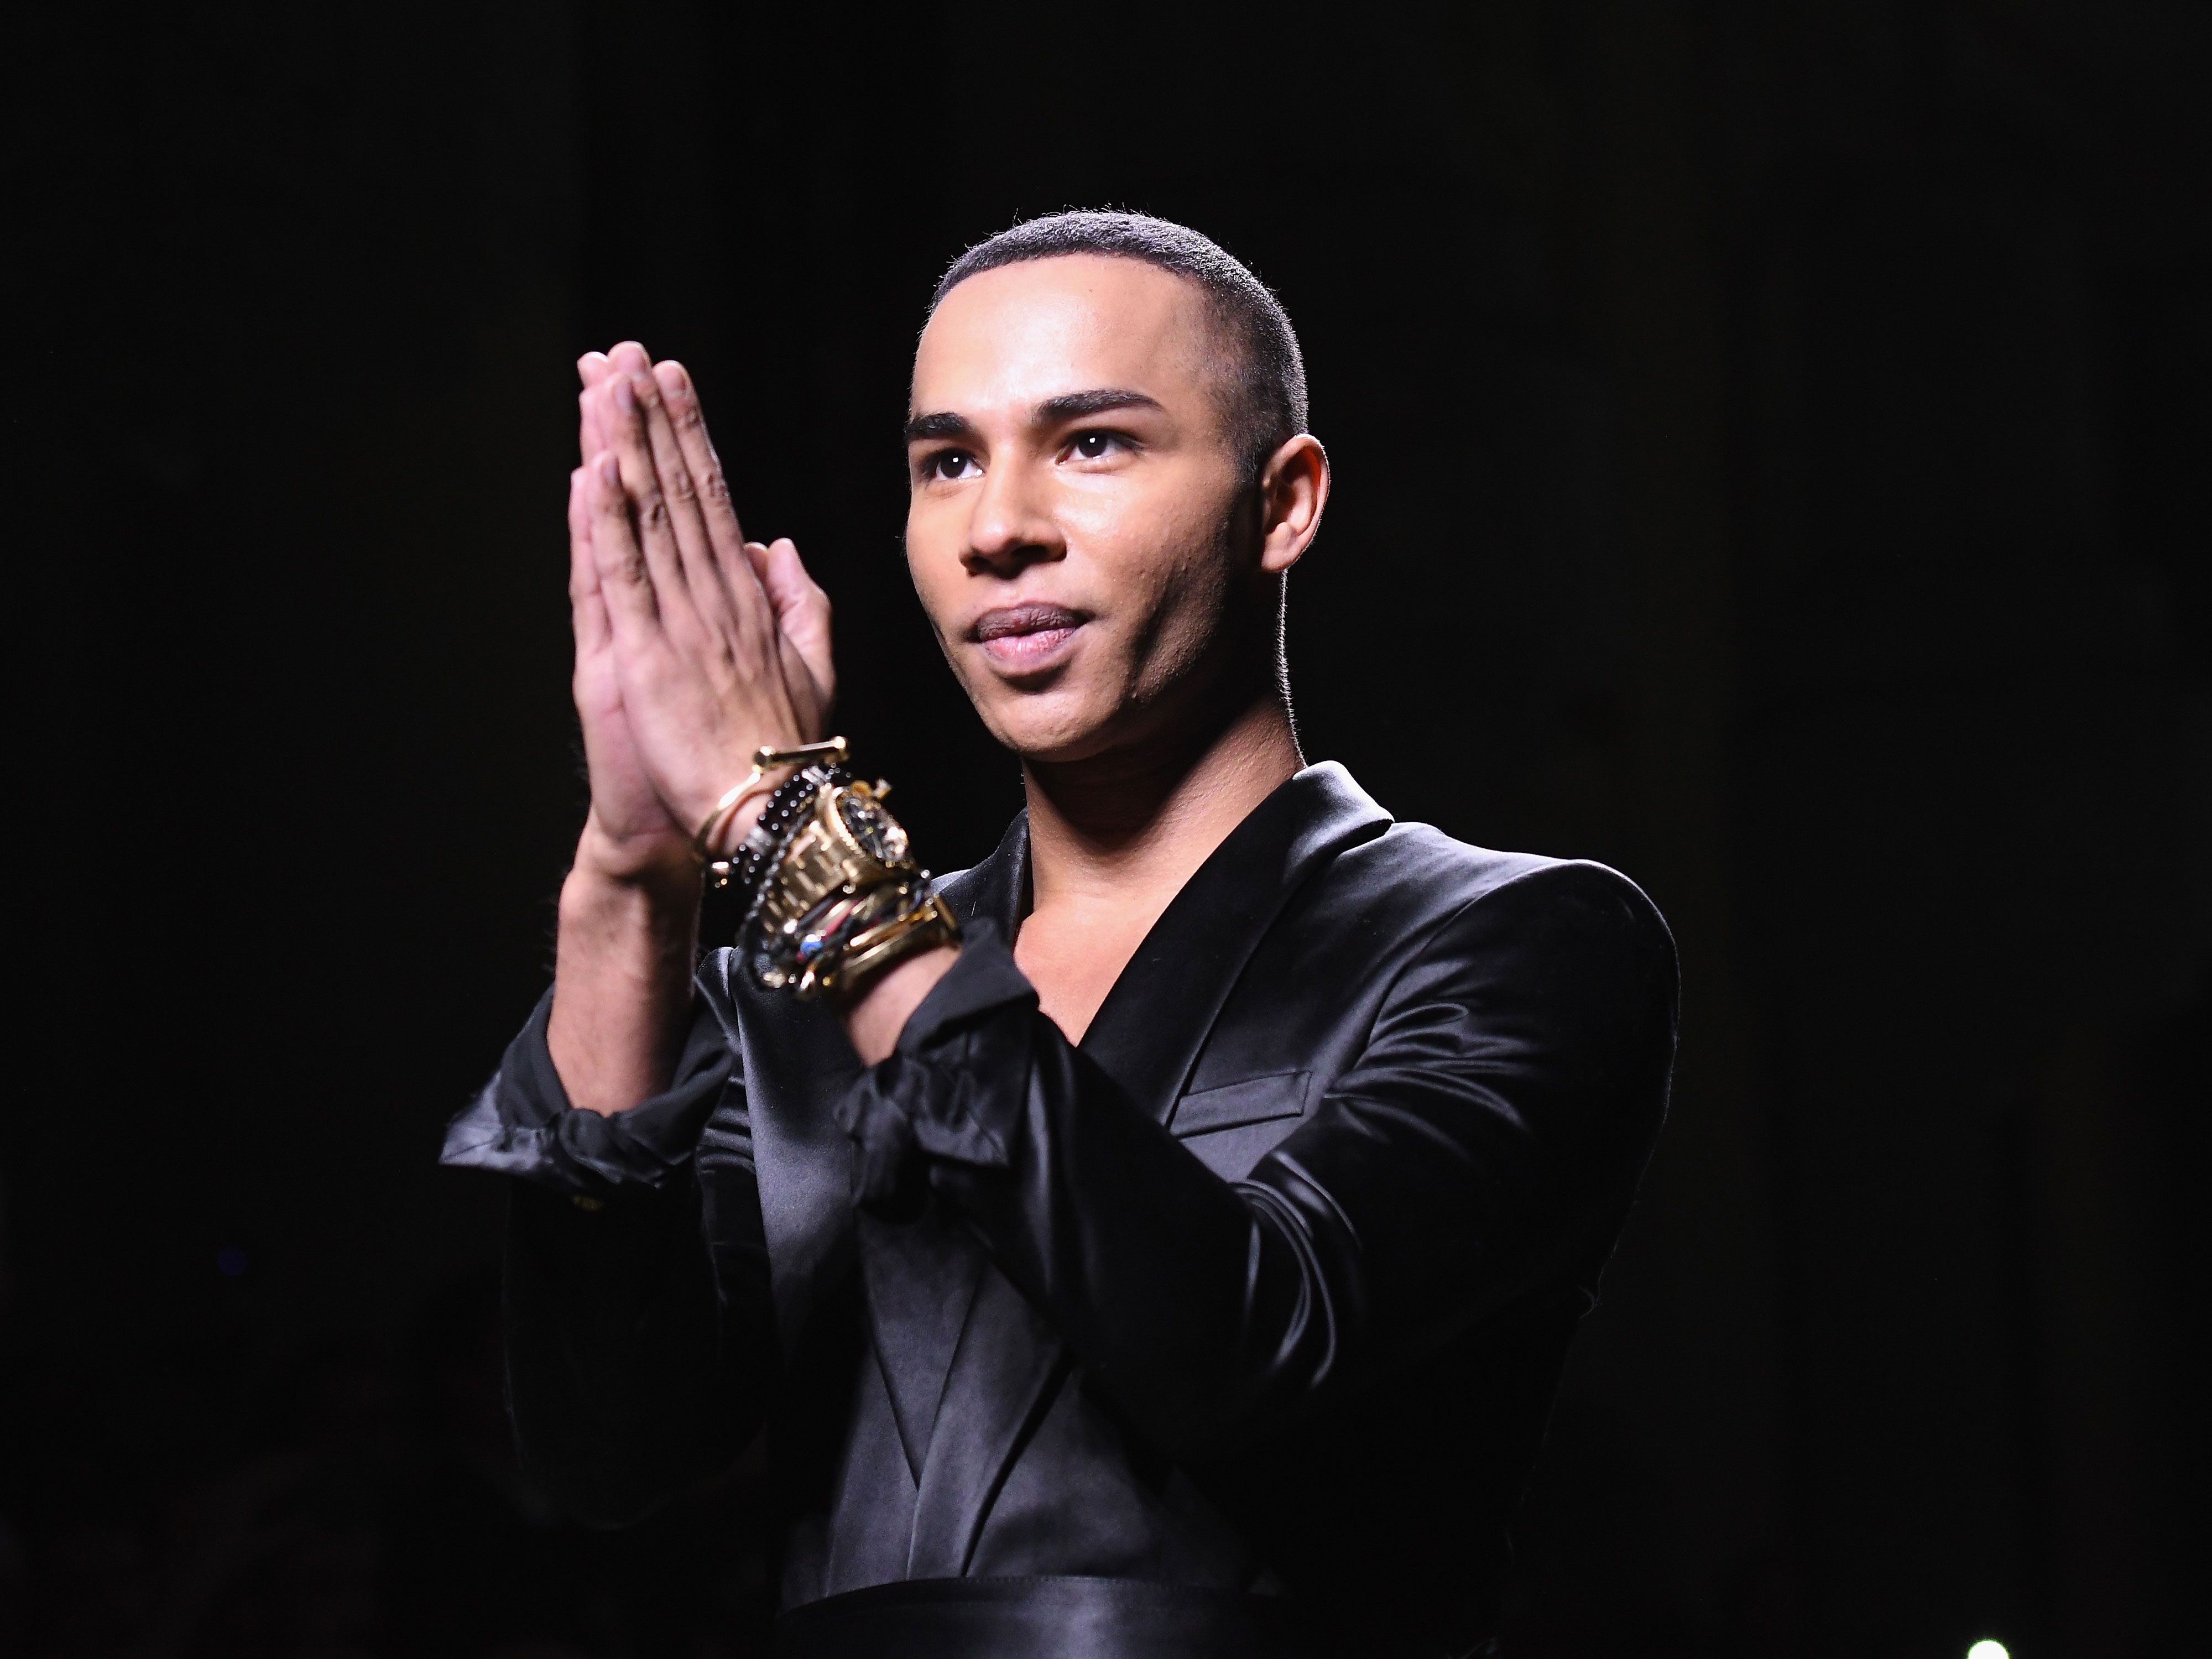 Balmain's Olivier Rousteing on the upcoming documentary his life – Documentary about Olivier Rousteing